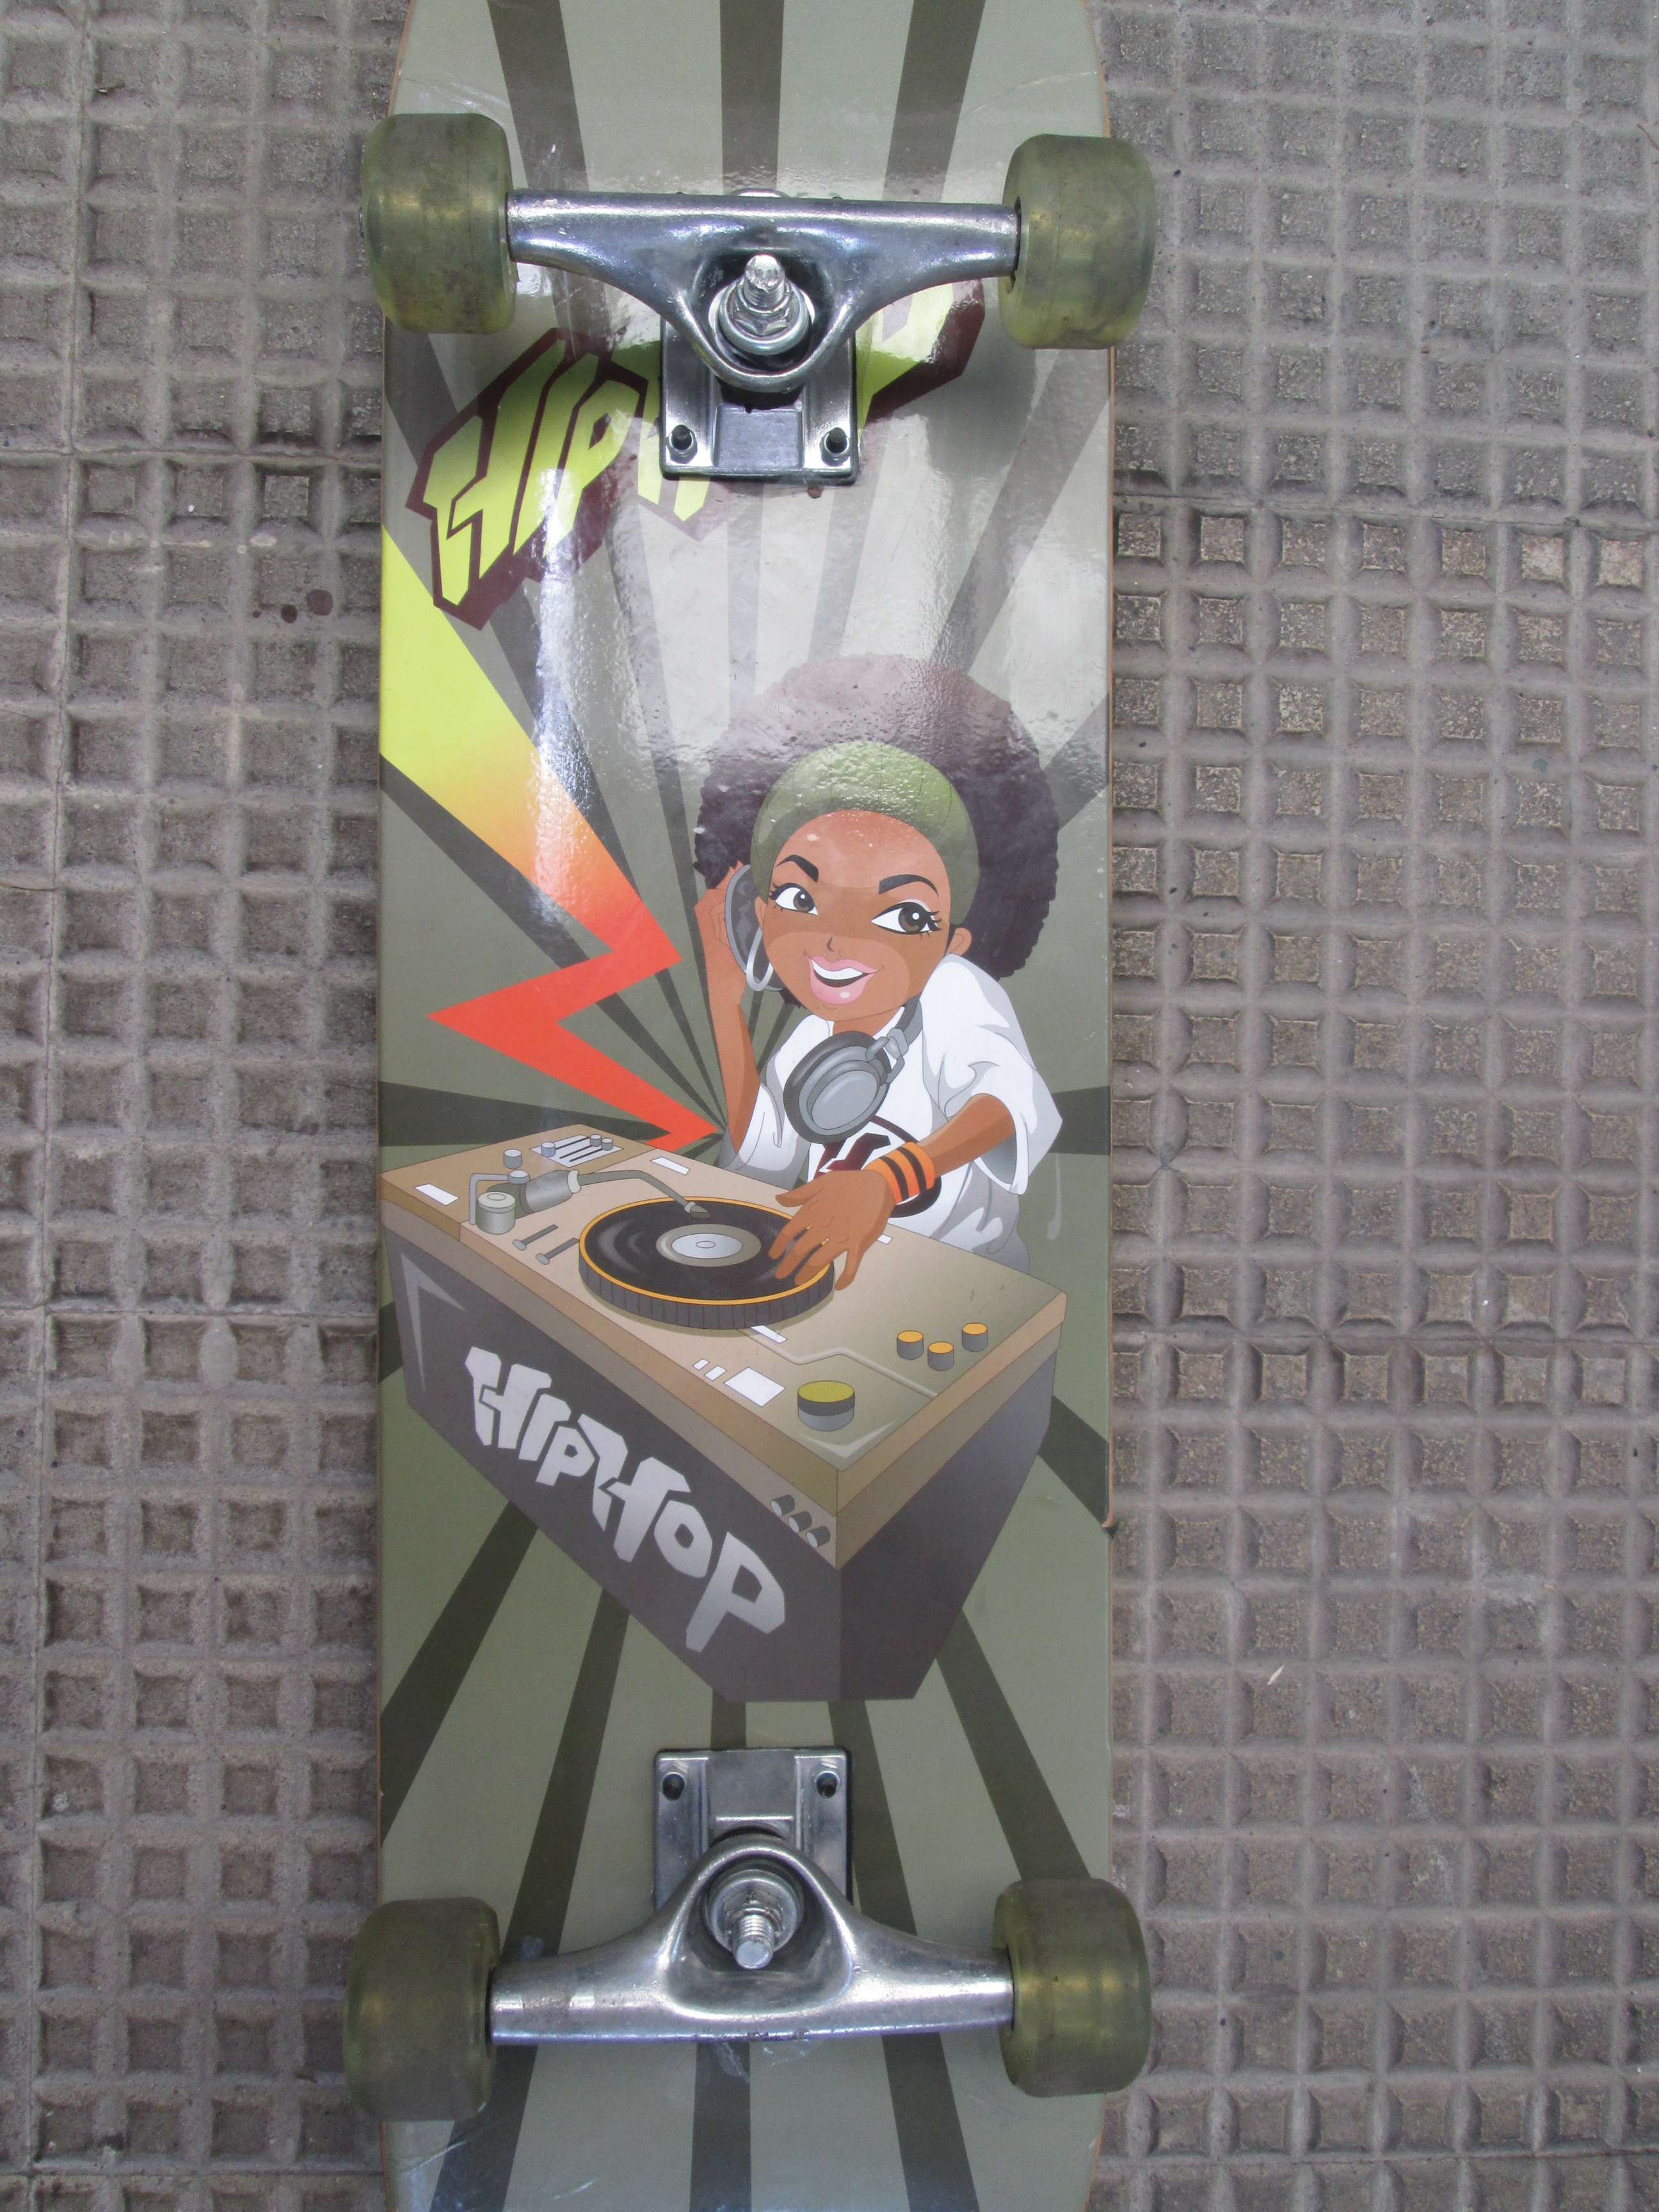 The skateboard I bought, with the image of an animated DJ on the deck